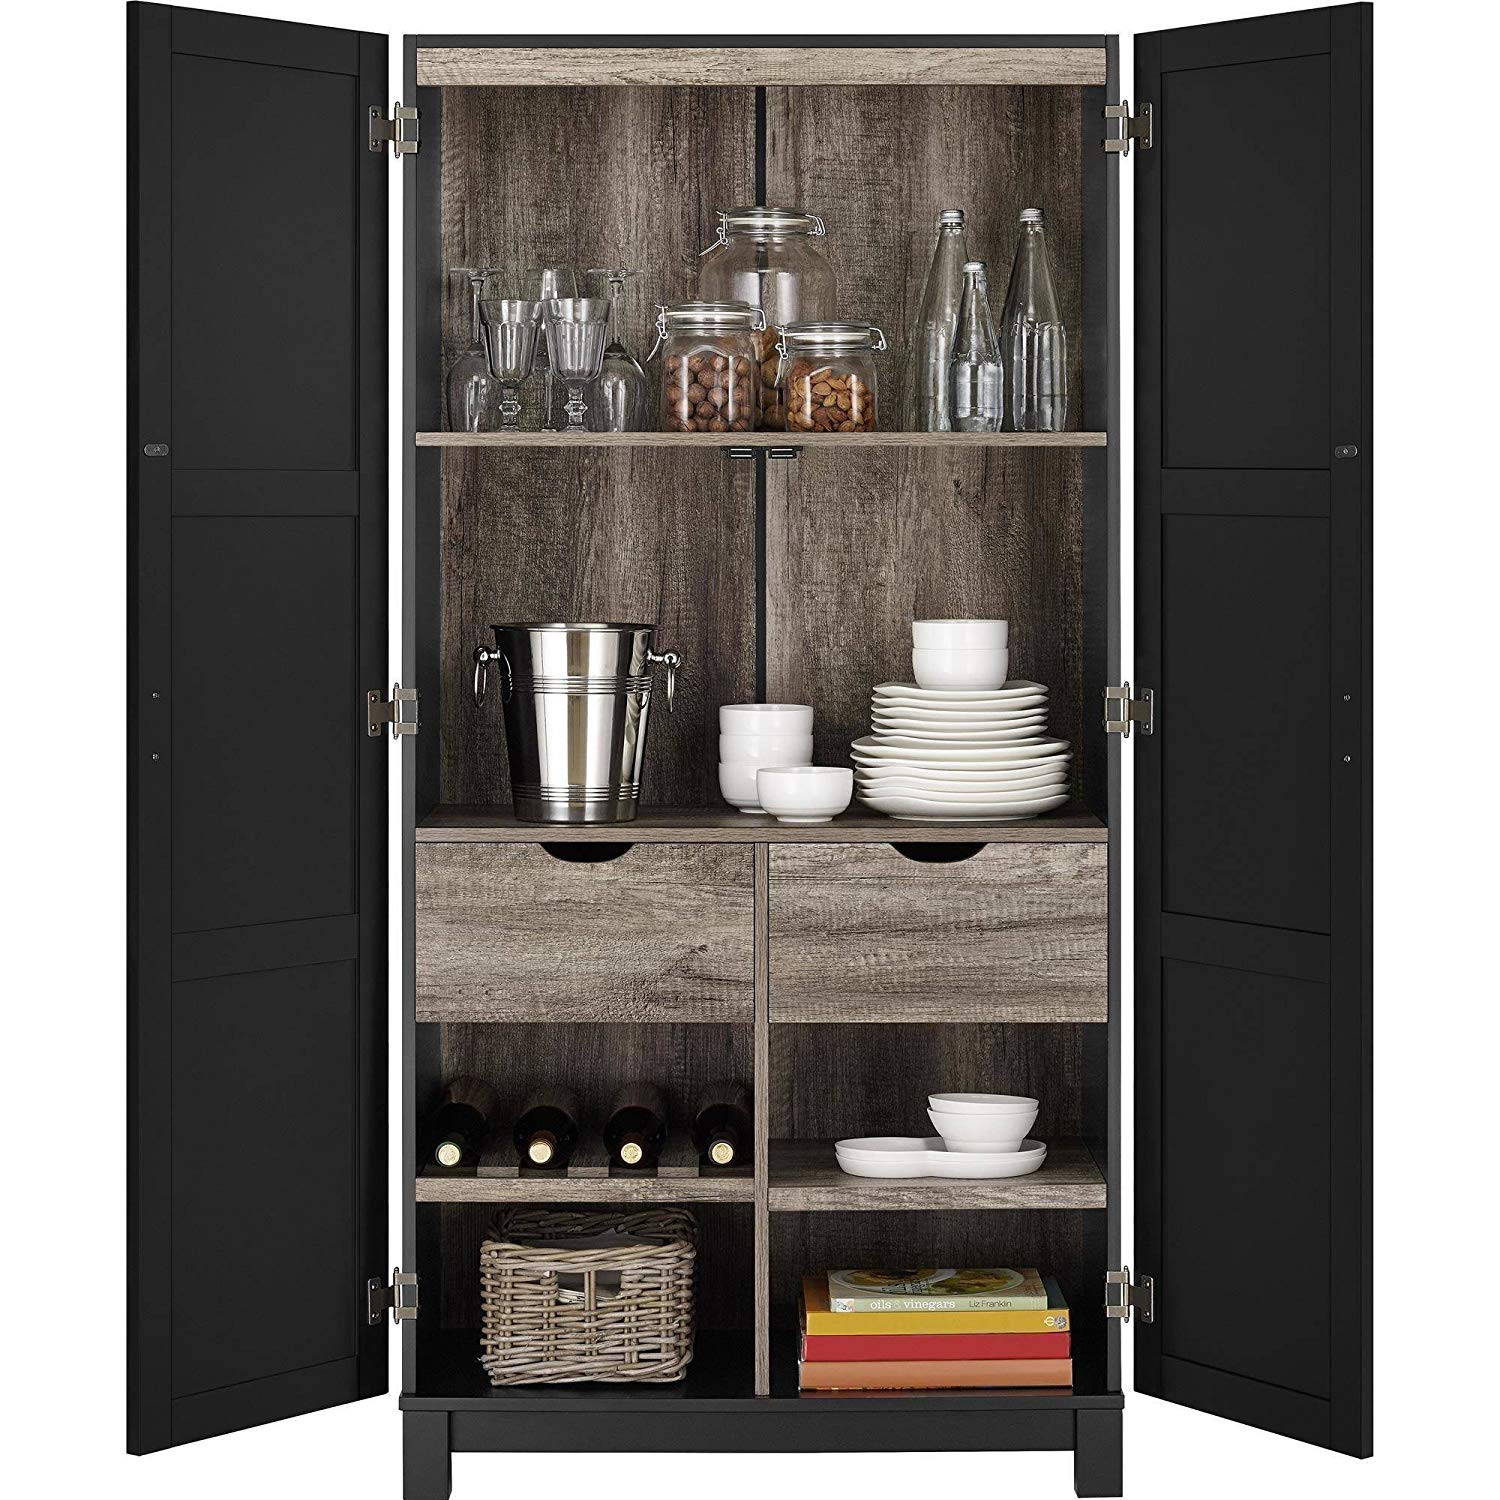 Extra Storage Cabinet For Kitchen
 Cheap Extra Kitchen Cabinet Shelves find Extra Kitchen